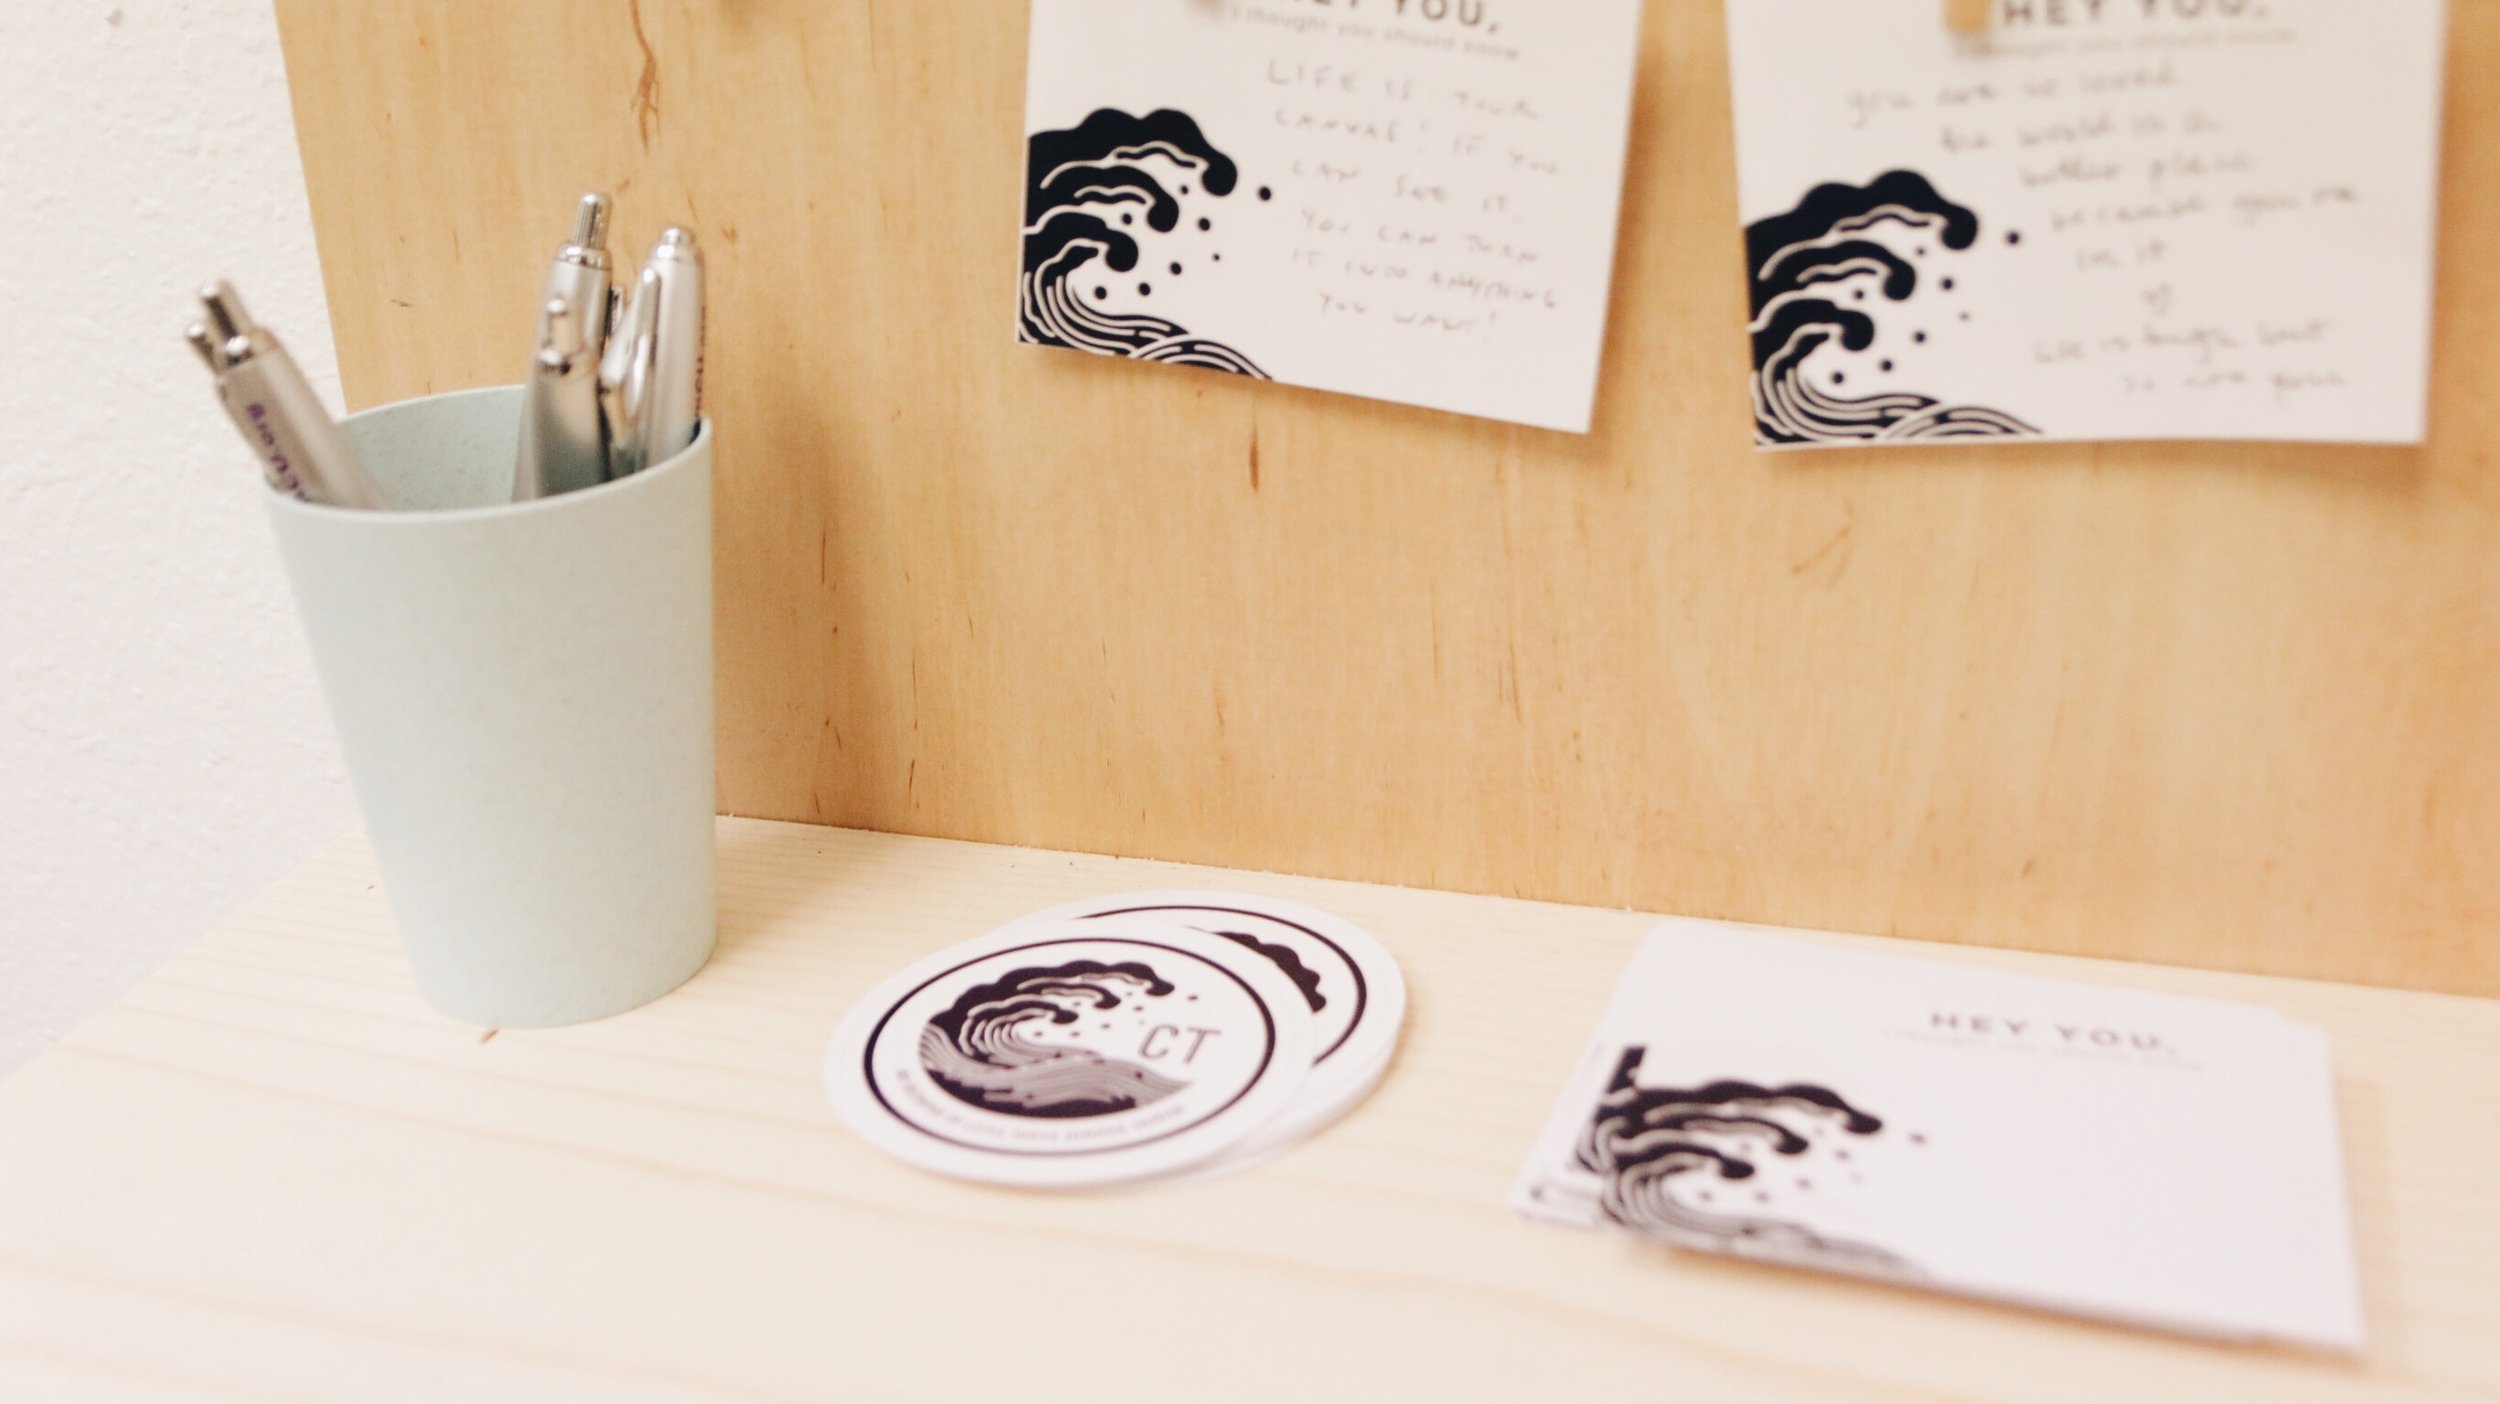 Stickers and stationary with a wave logo on it rest next to a cup of pens.